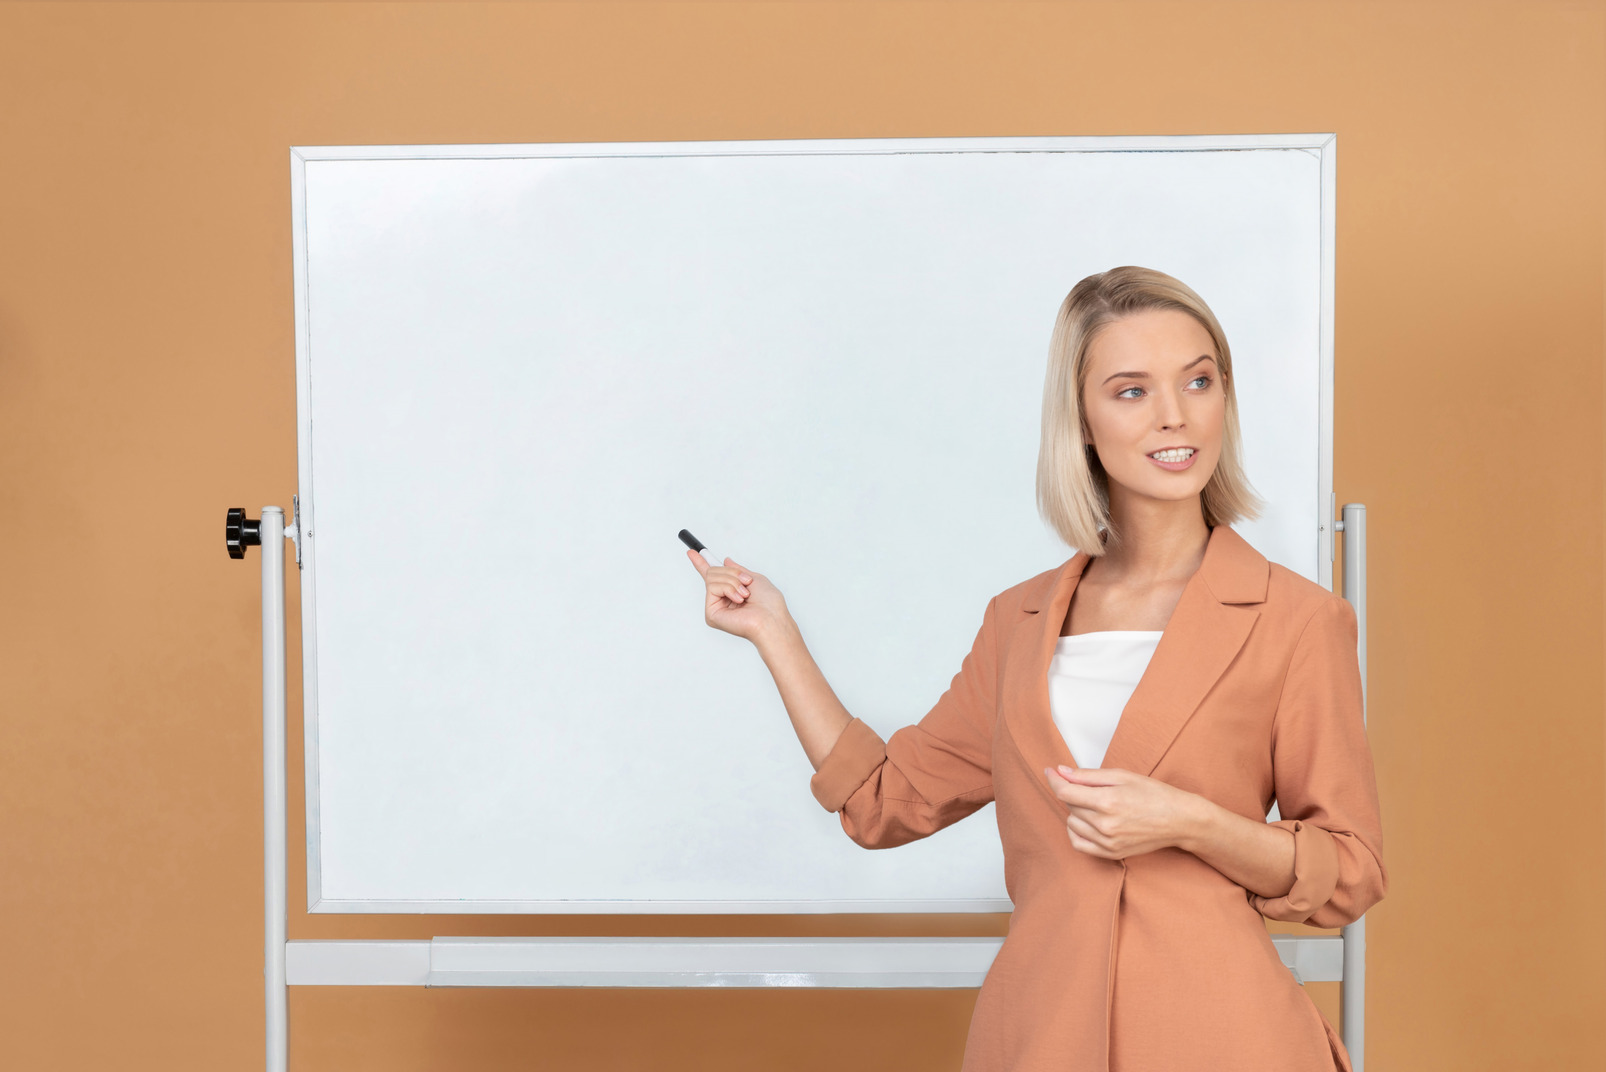 Attractive woman standing next to a whiteboard and explaining something